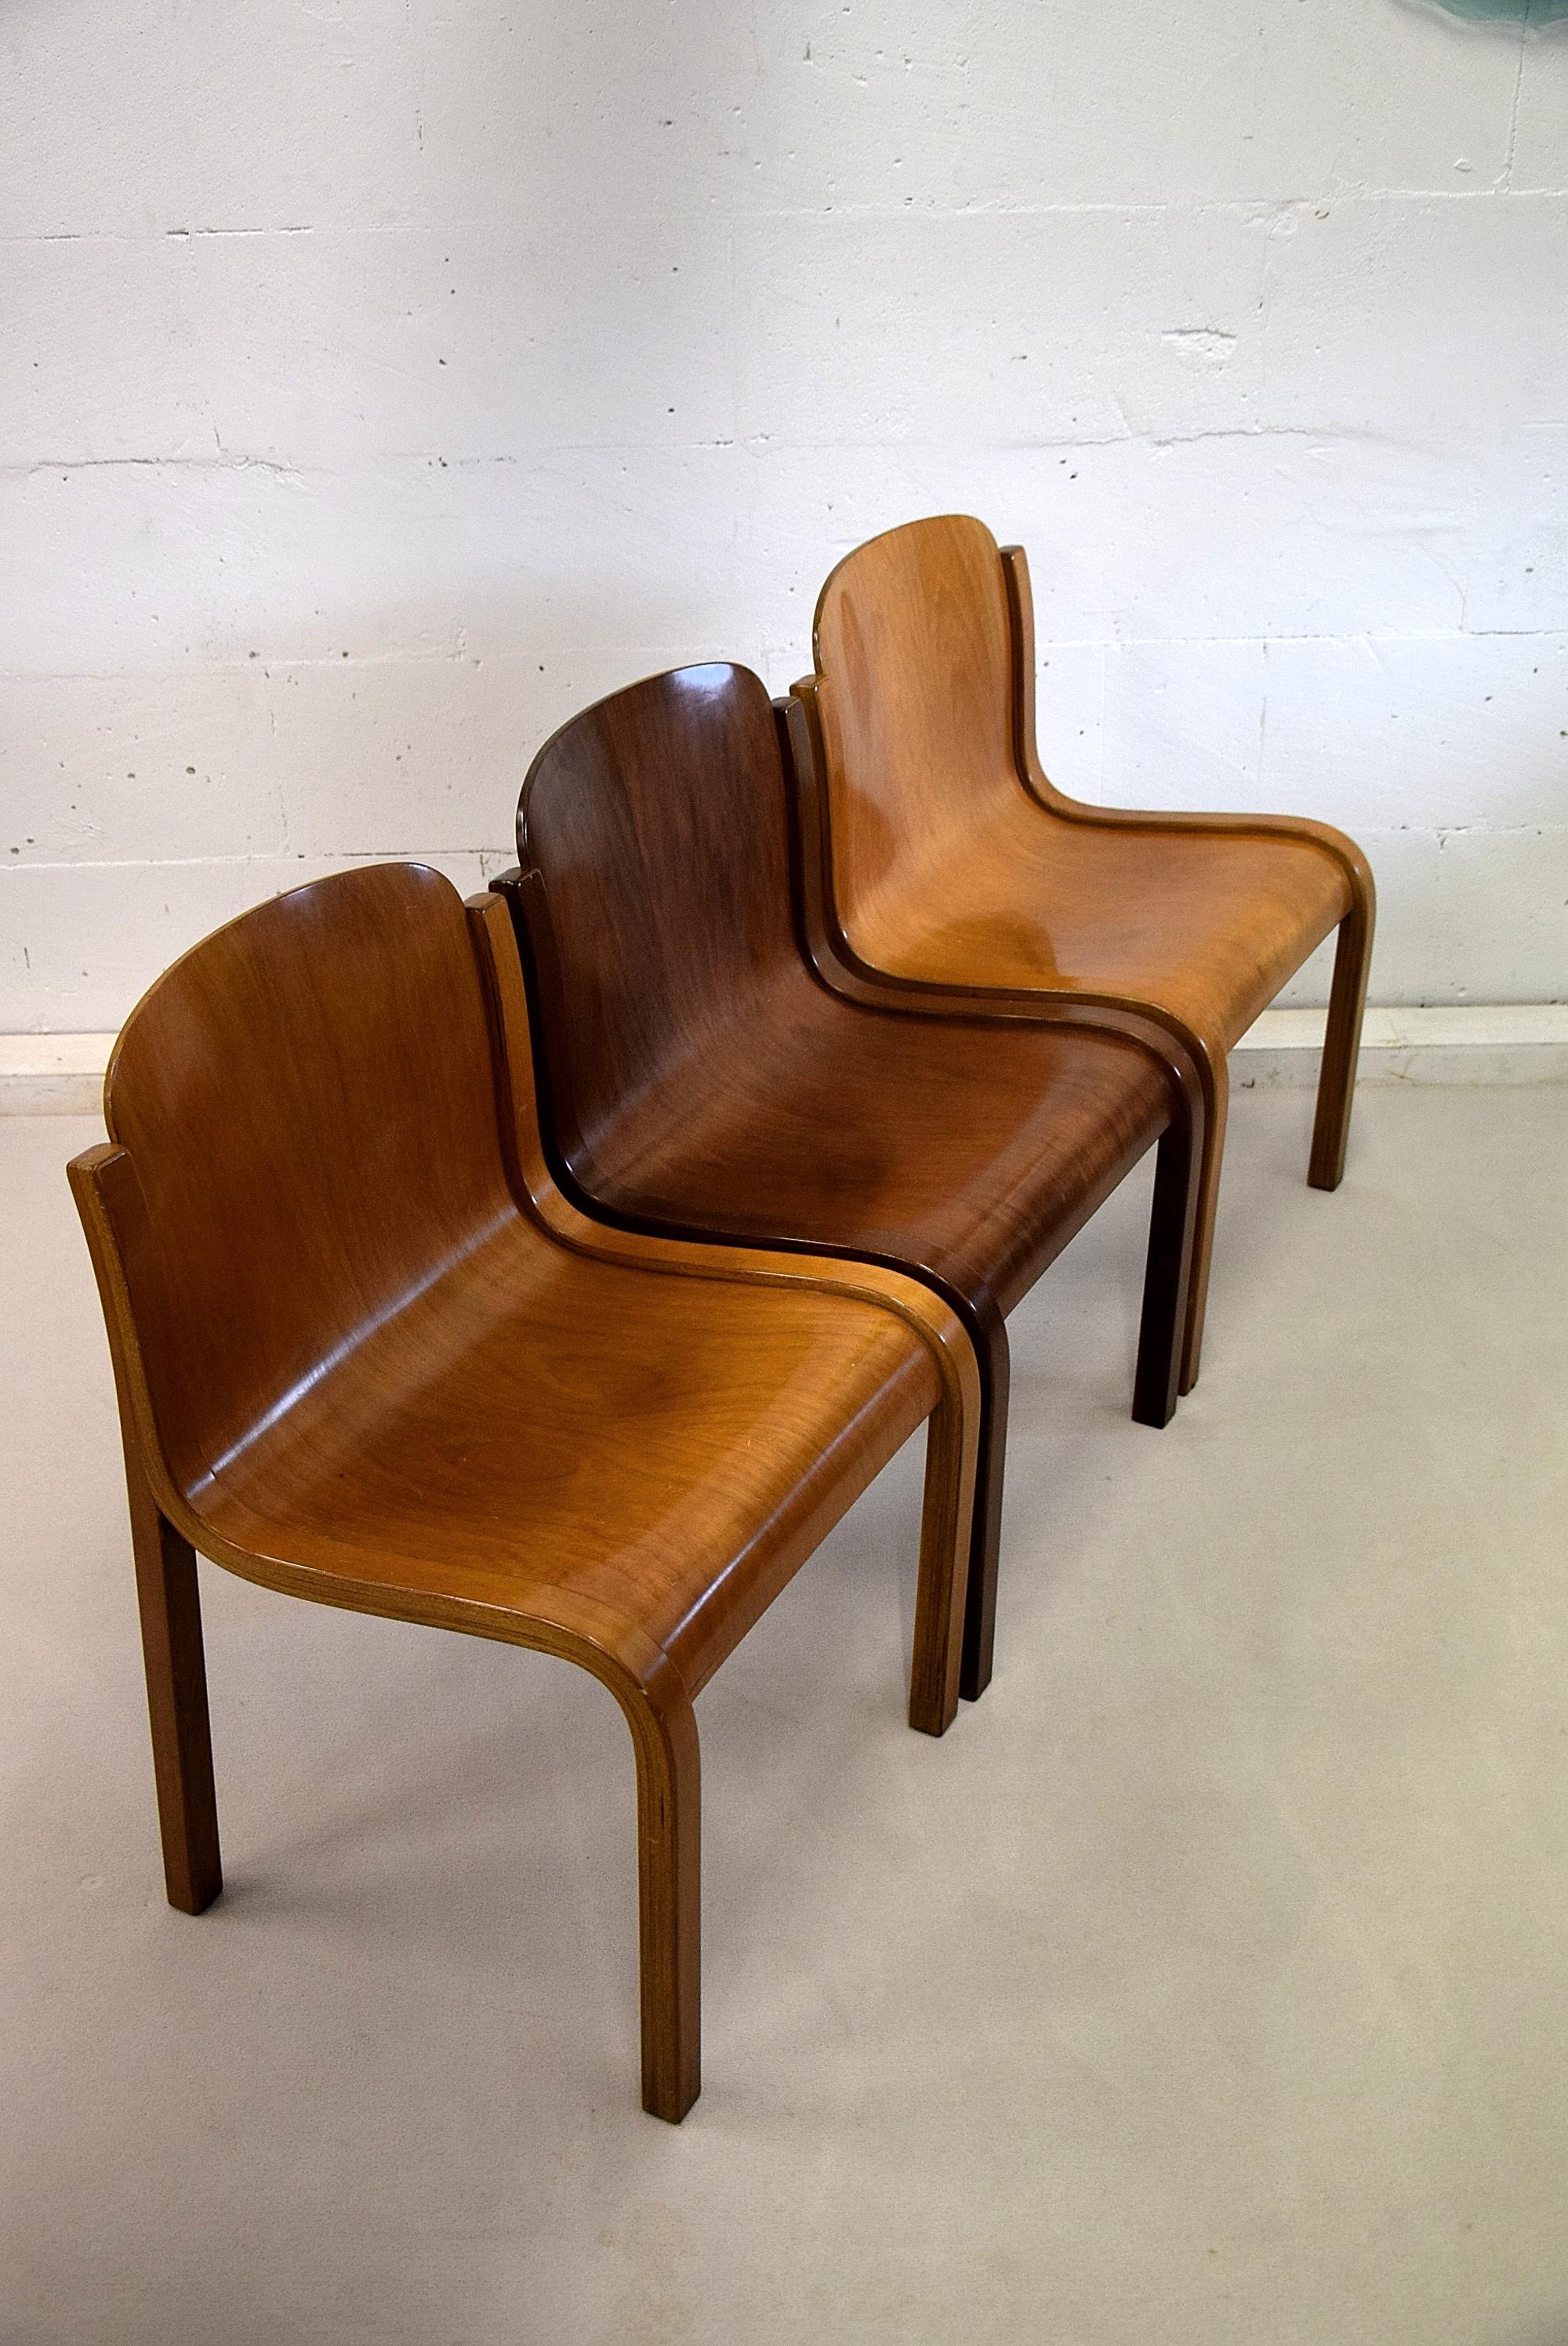 Carlo Bartoli curved plywood Mid-Century Modern Italian chairs for T70, Italy.
These elegant and stylish Mito chairs were designed in 1969 by Carlo Bartoli.
There are two dark brown ones and two lighter brown chairs.

They will be shipped